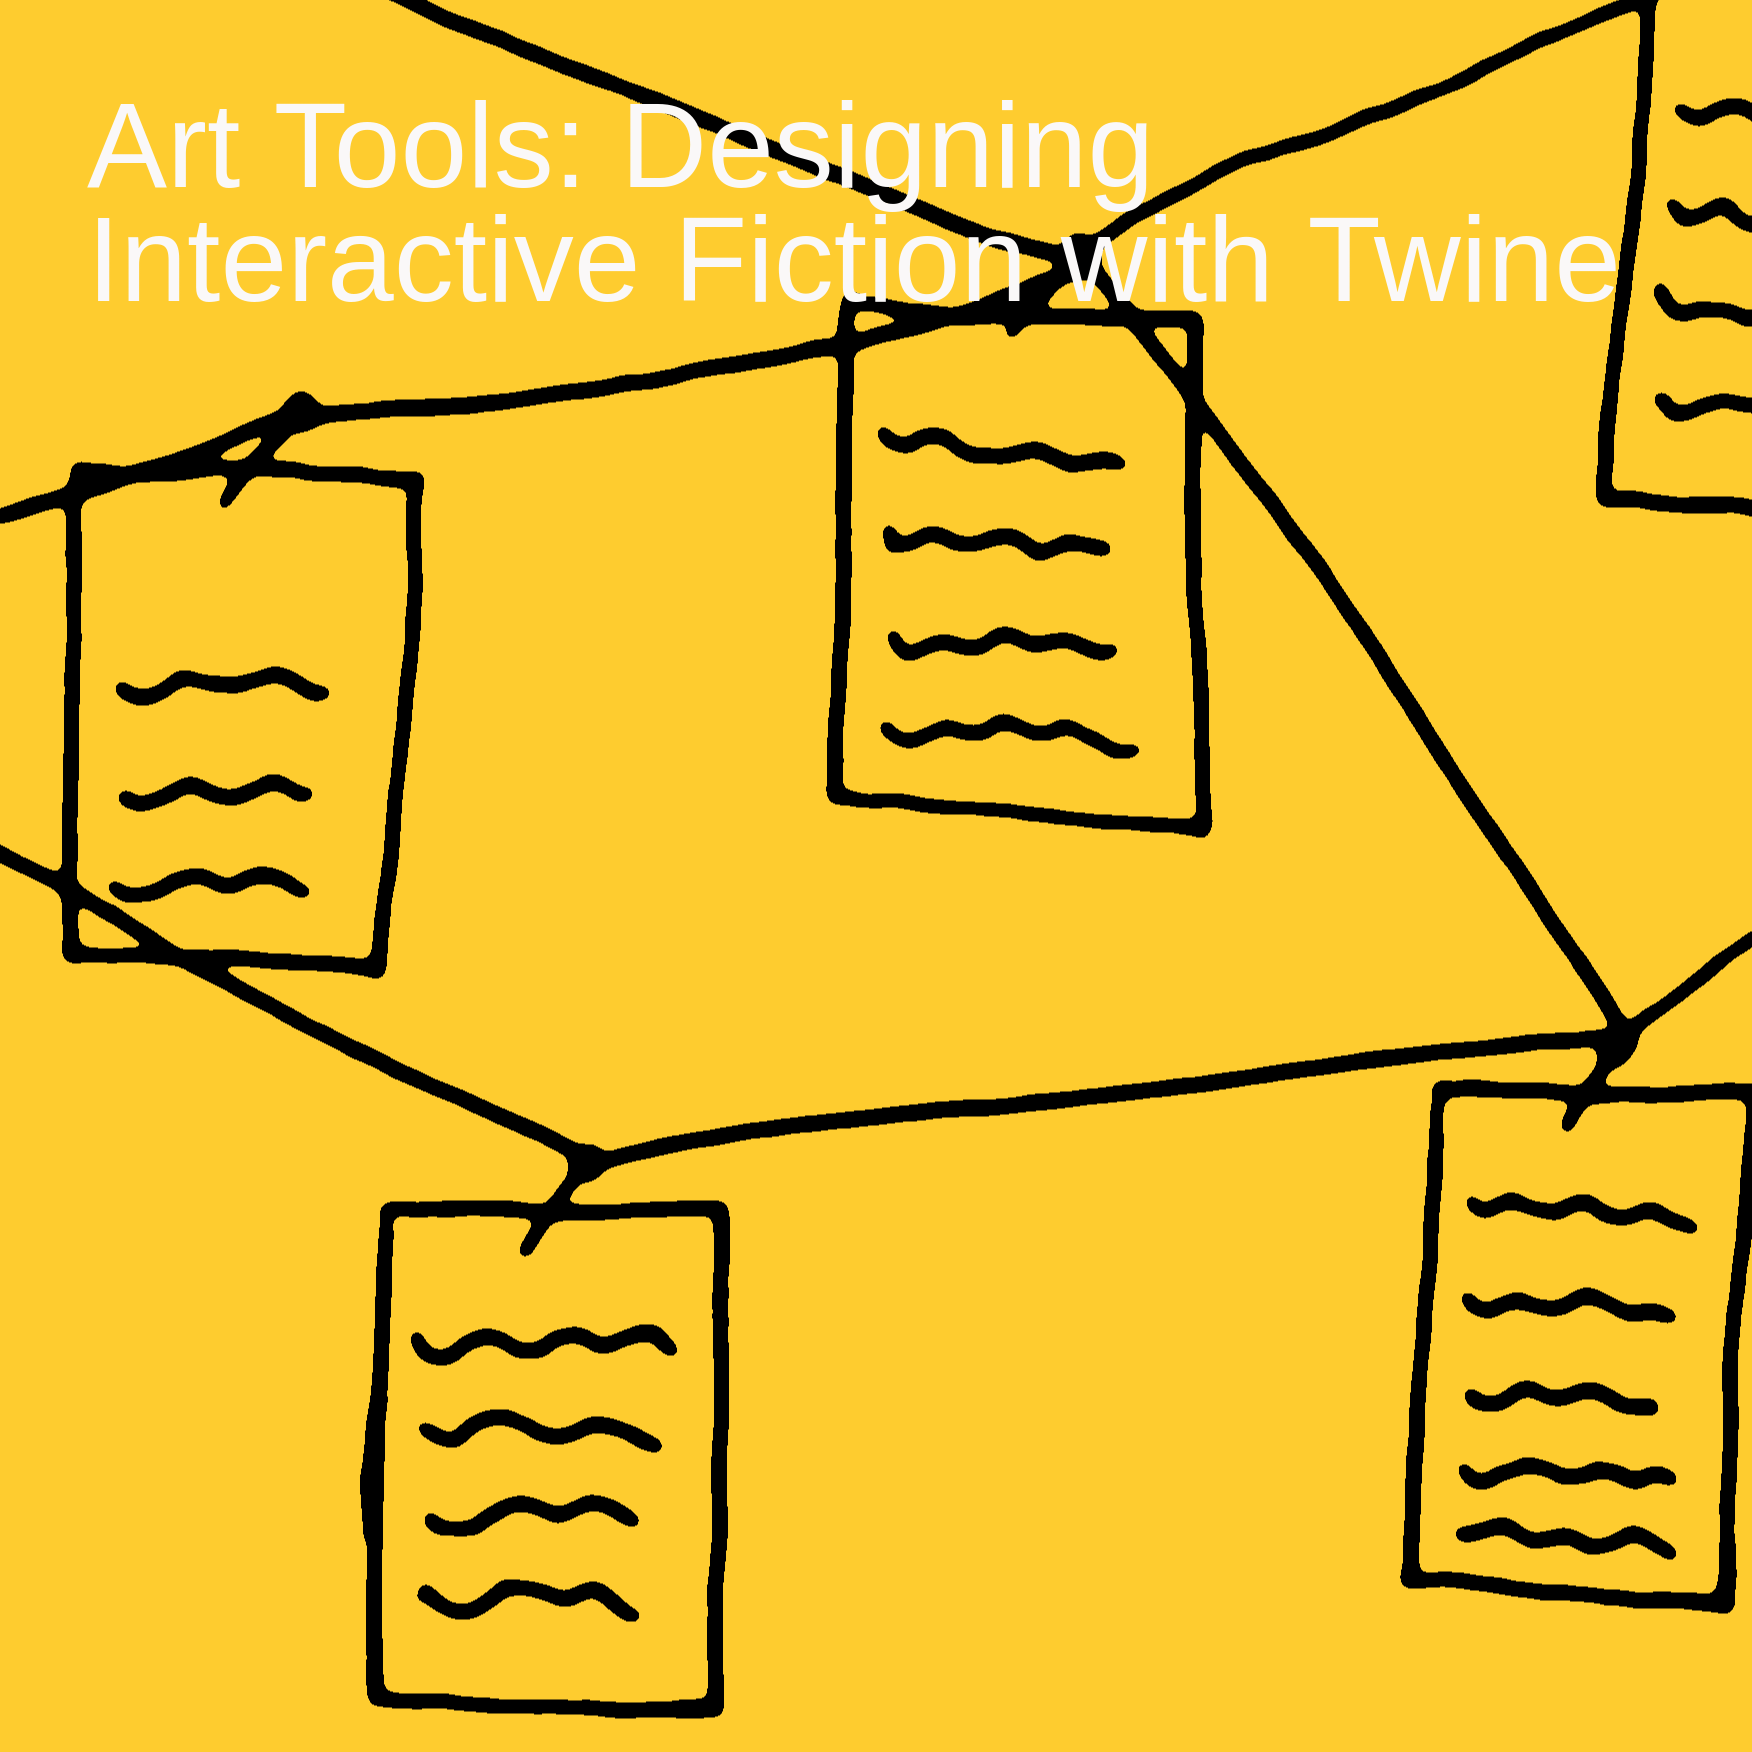 Art Tools: Designing Interactive Fiction with Twine